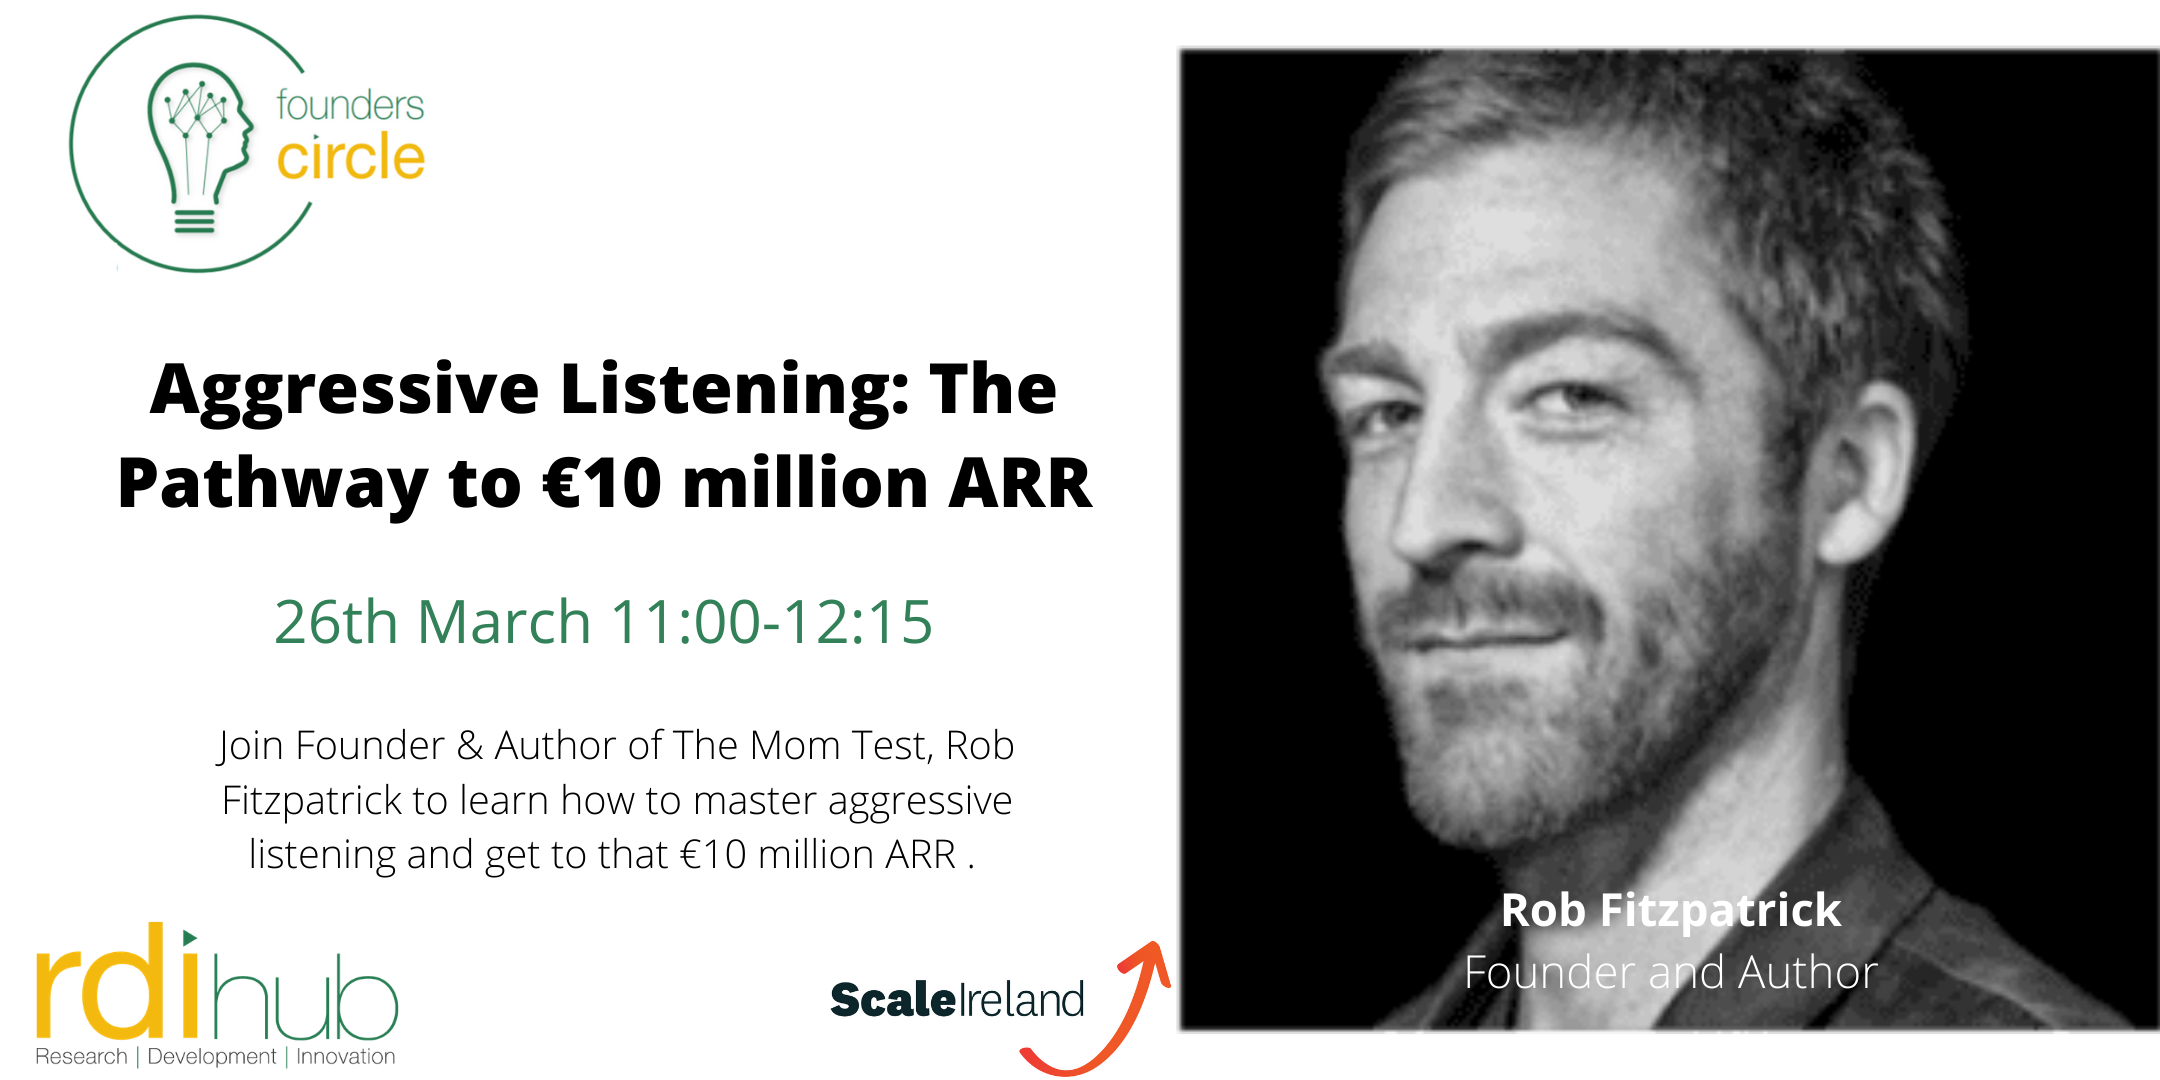 #Founders’Circle – Aggressive Listening : The Pathway to €10million ARR with Rob Fitzpatrick